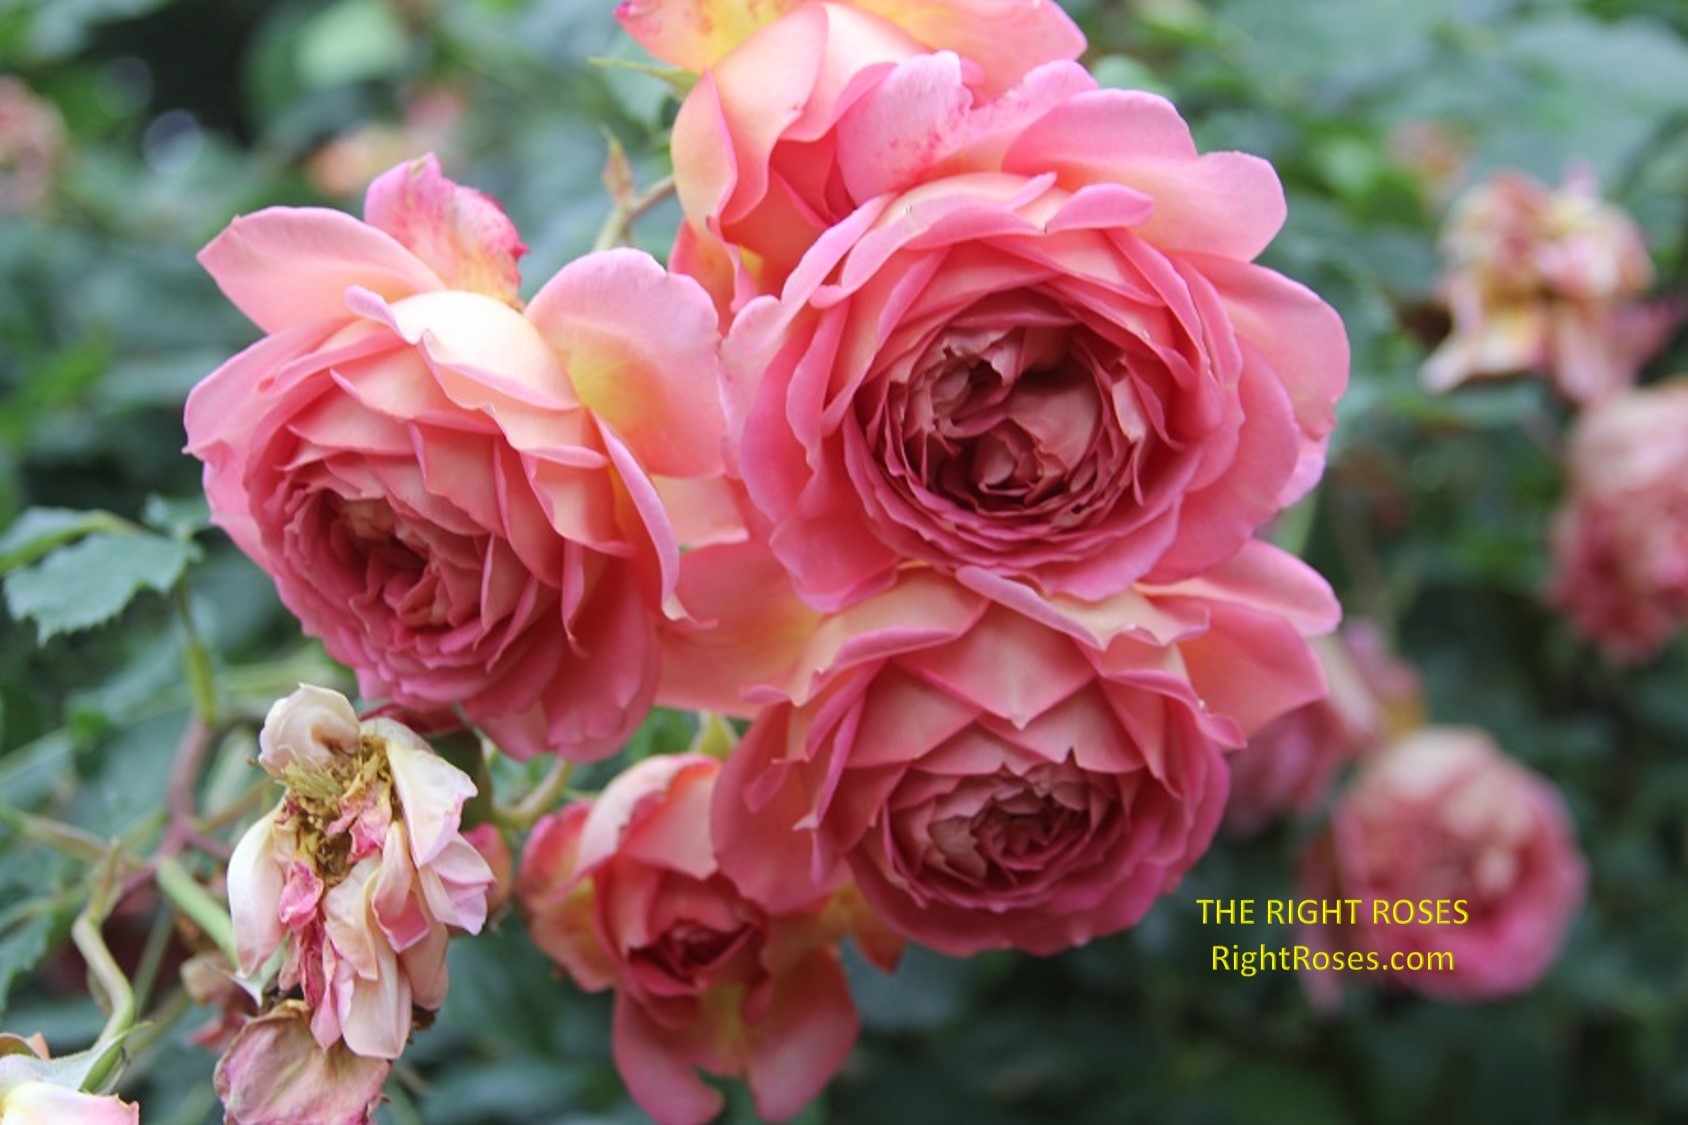 Jubilee Celebration rose review the right roses score best top garden store david austin english roses rose products rose rating the right leap rose food fertilizer